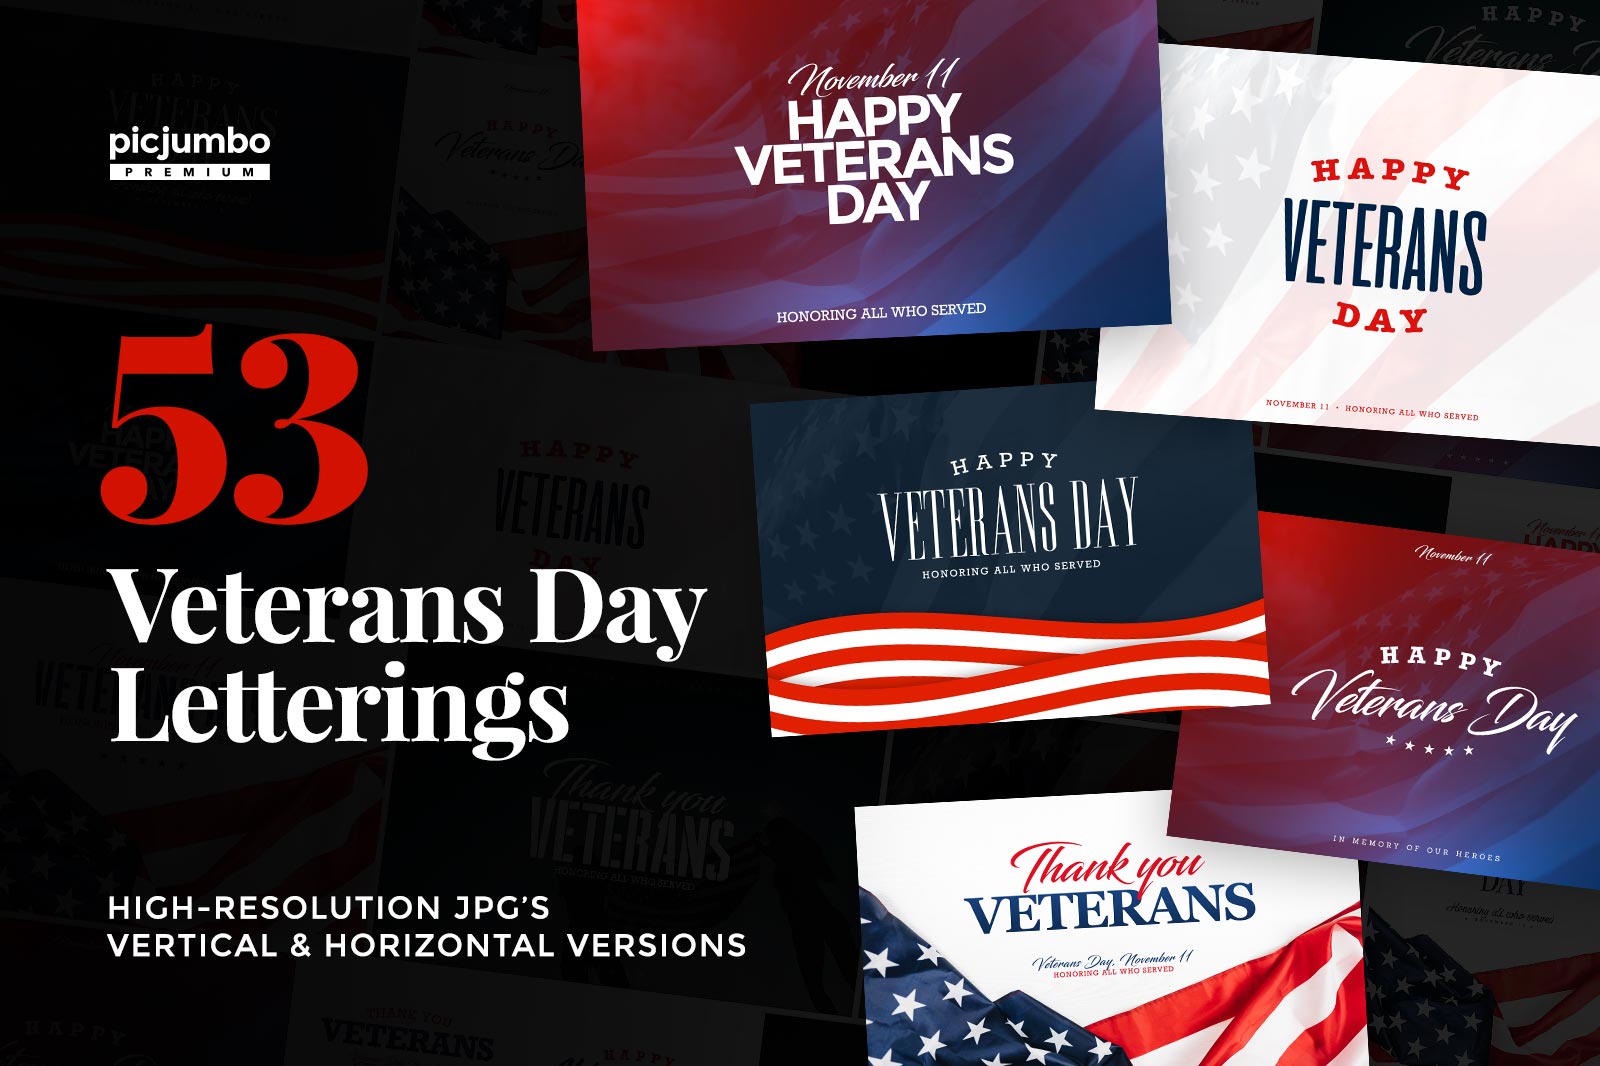 Download hi-res stock photos from our Veterans Day Letterings PREMIUM Collection!